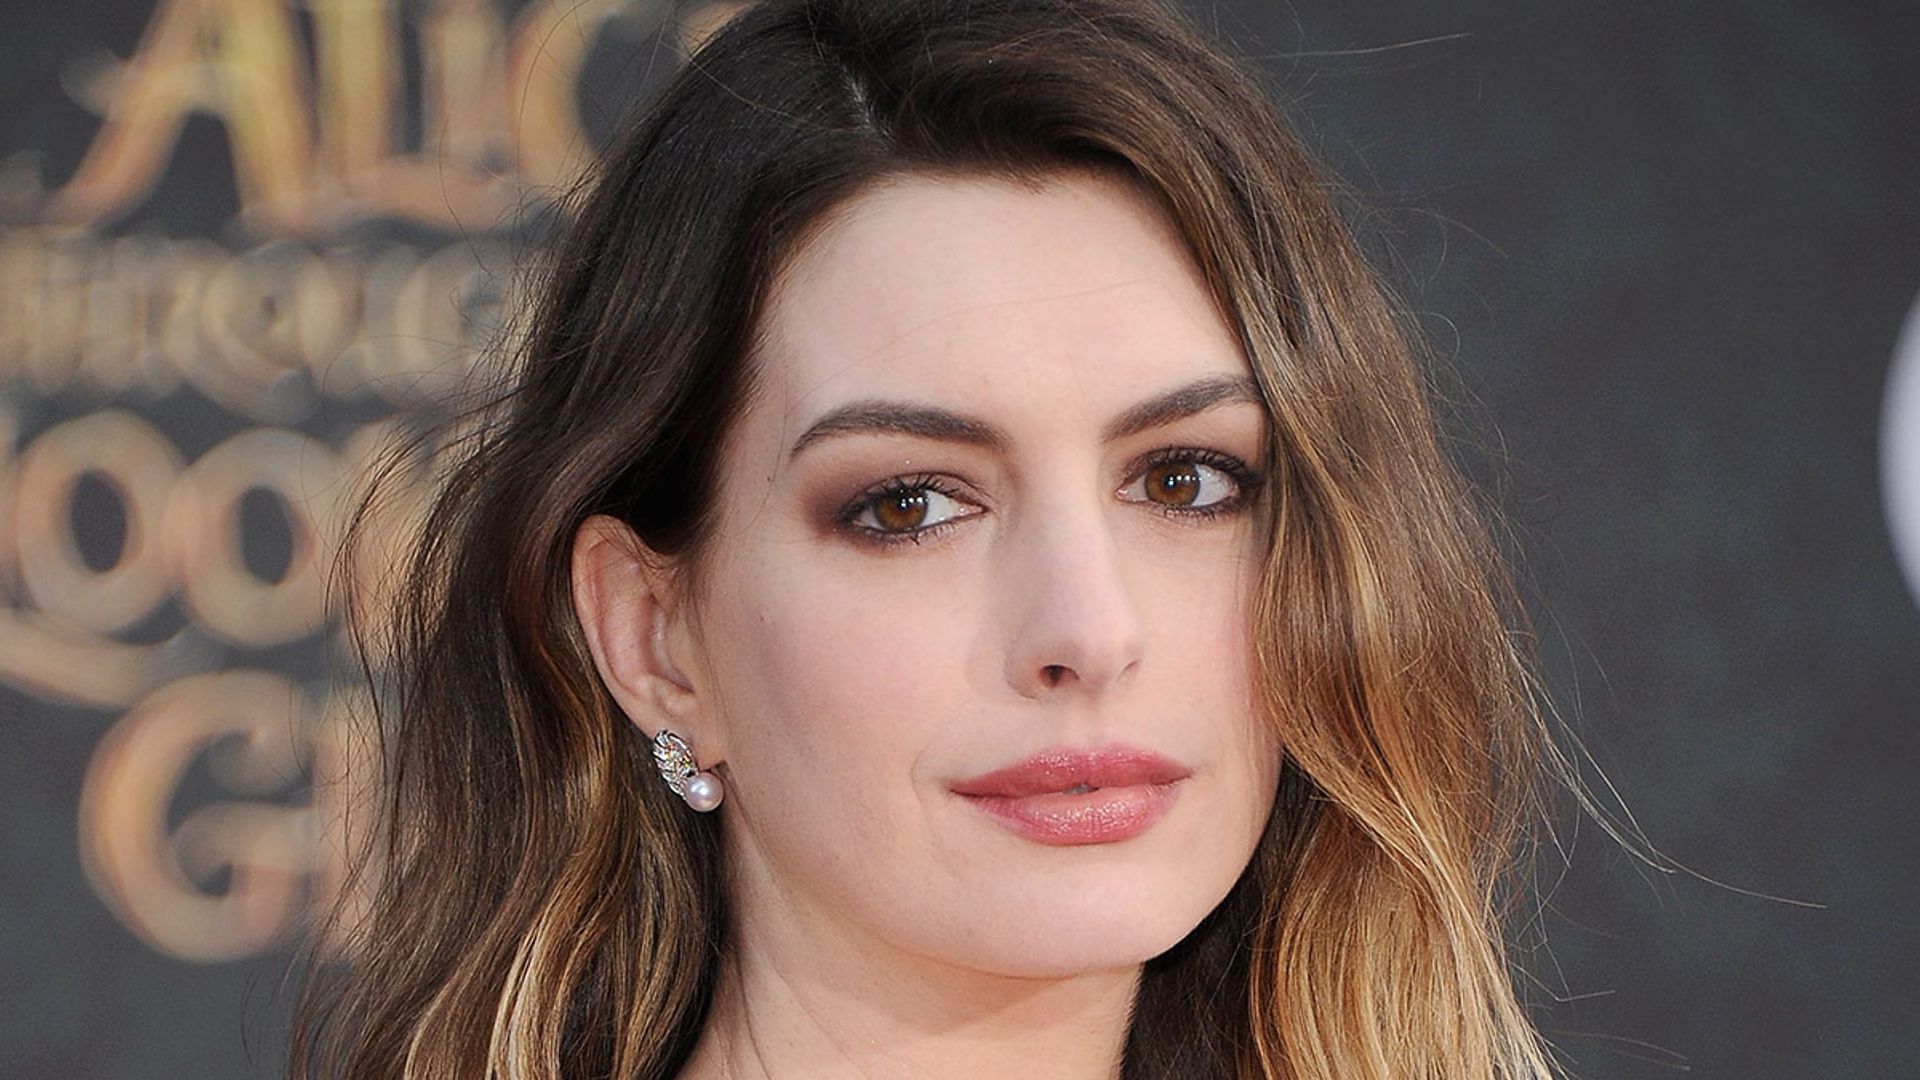 Anne Hathaway praised by fans after sharing post that may cause offence